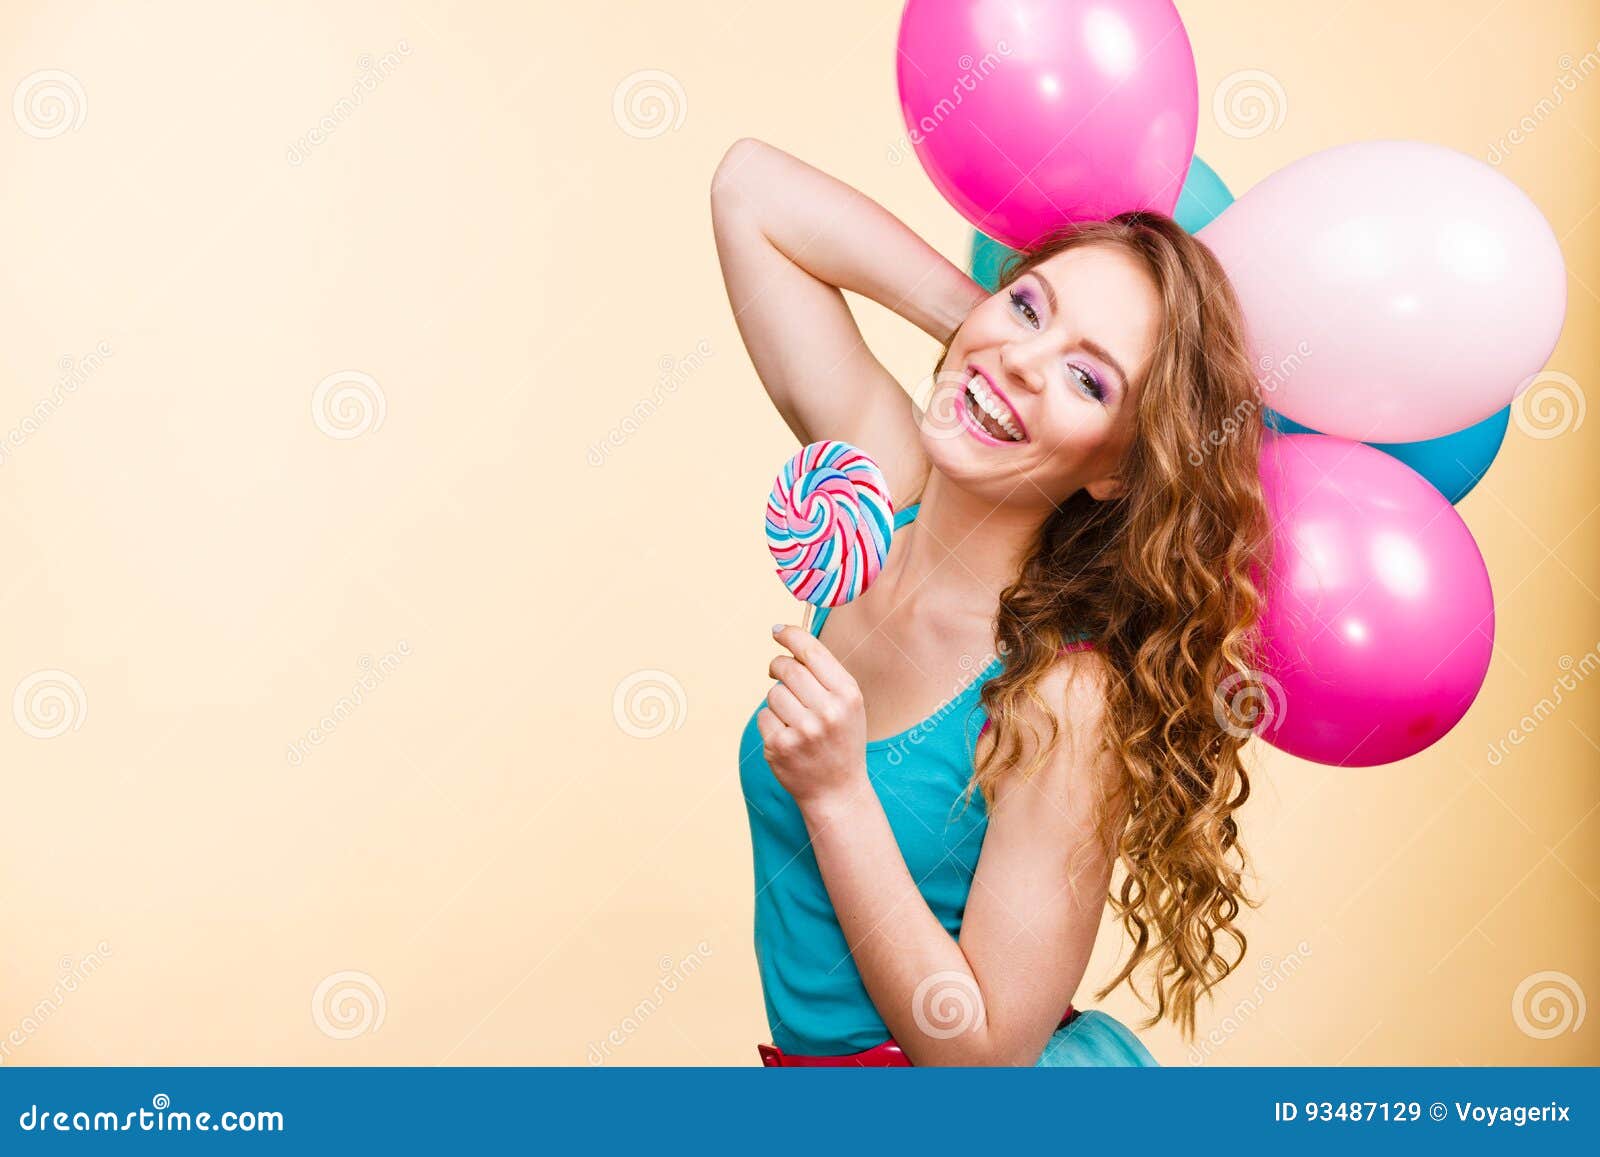 Woman with Colorful Balloons and Lollipop Stock Image - Image of candy ...